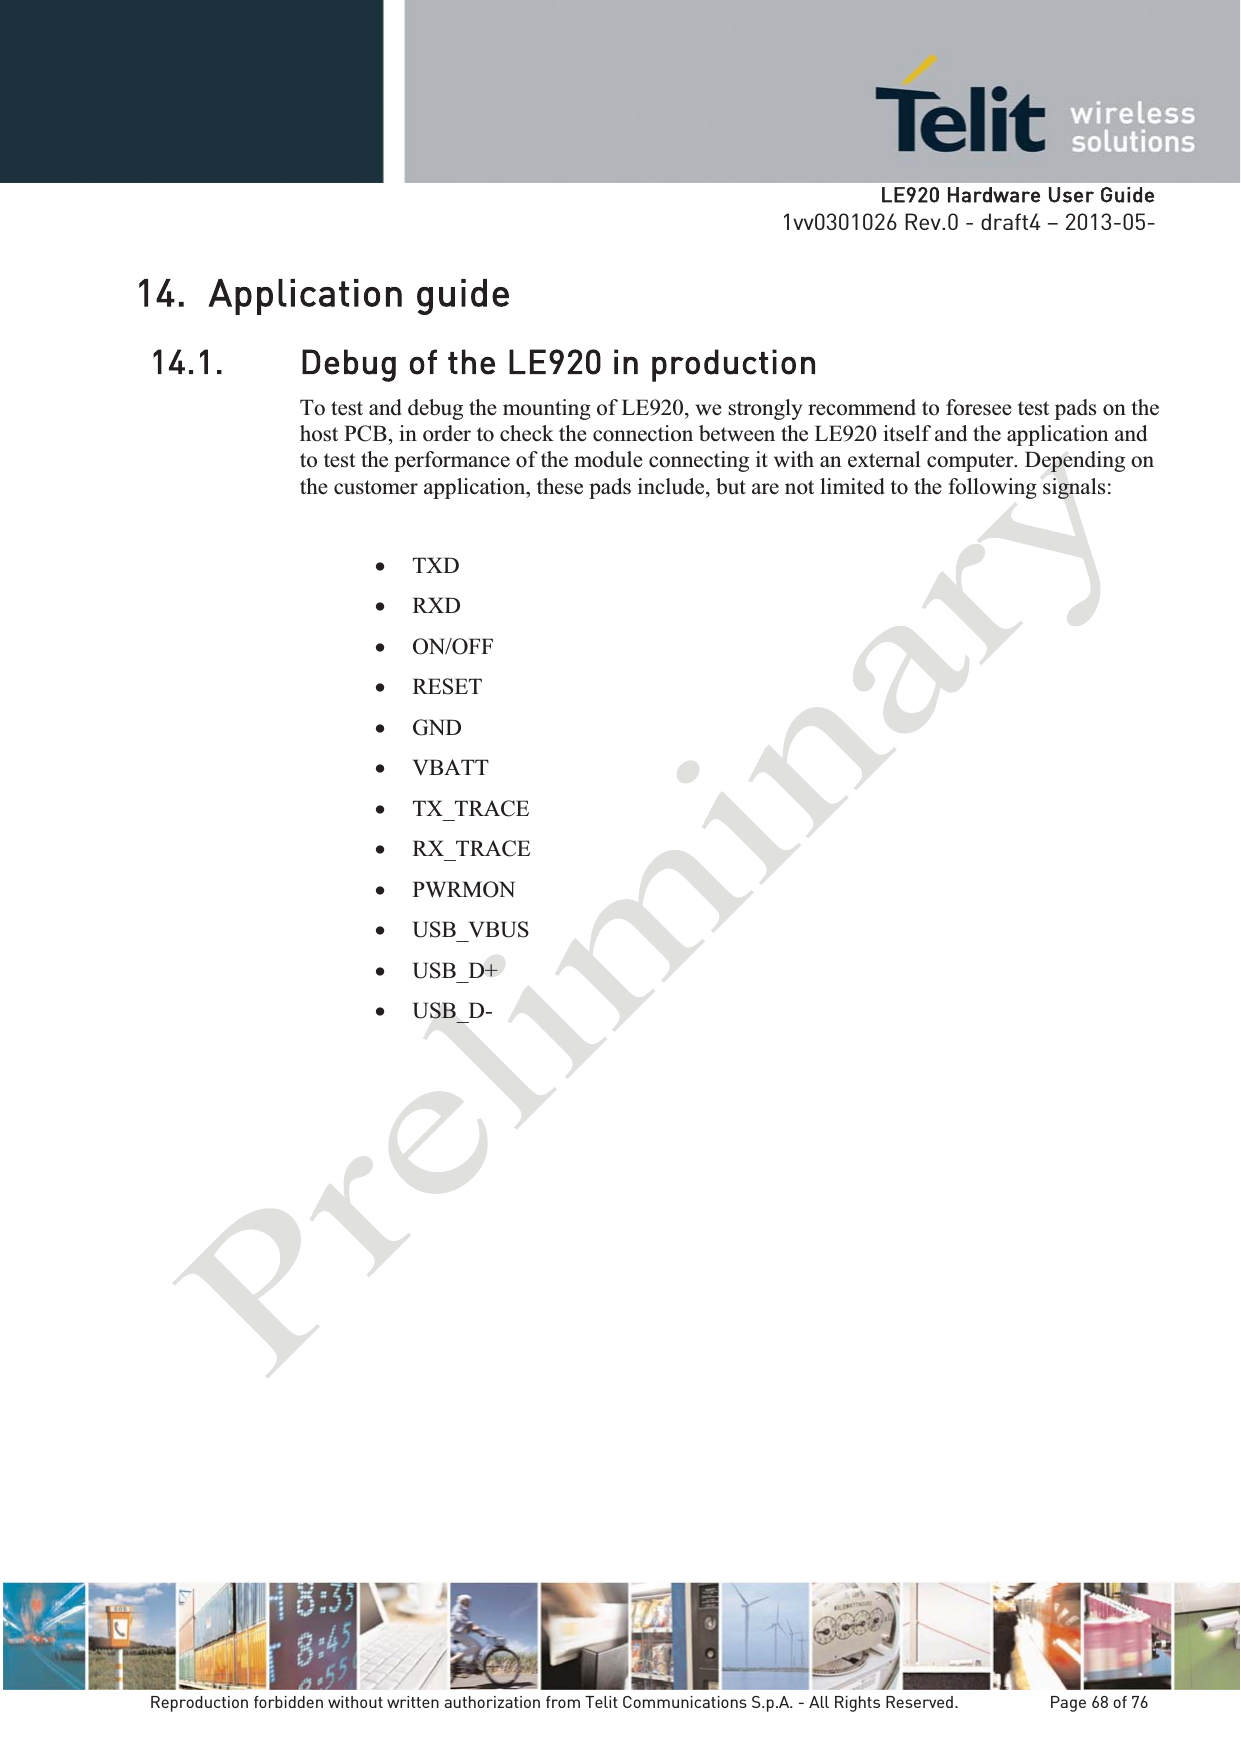   LLE920 Hardware User Guide1vv0301026 Rev.0 - draft4 – 2013-05-Reproduction forbidden without written authorization from Telit Communications S.p.A. - All Rights Reserved.    Page 68 of 76 14. Application guide 14.1. Debug of the LE920 in productionTo test and debug the mounting of LE920, we strongly recommend to foresee test pads on the host PCB, in order to check the connection between the LE920 itself and the application and to test the performance of the module connecting it with an external computer. Depending on the customer application, these pads include, but are not limited to the following signals:  x TXD x RXD x ON/OFF x RESET x GND x VBATT x TX_TRACE x RX_TRACE x PWRMON  x USB_VBUS x USB_D+ x USB_D- 